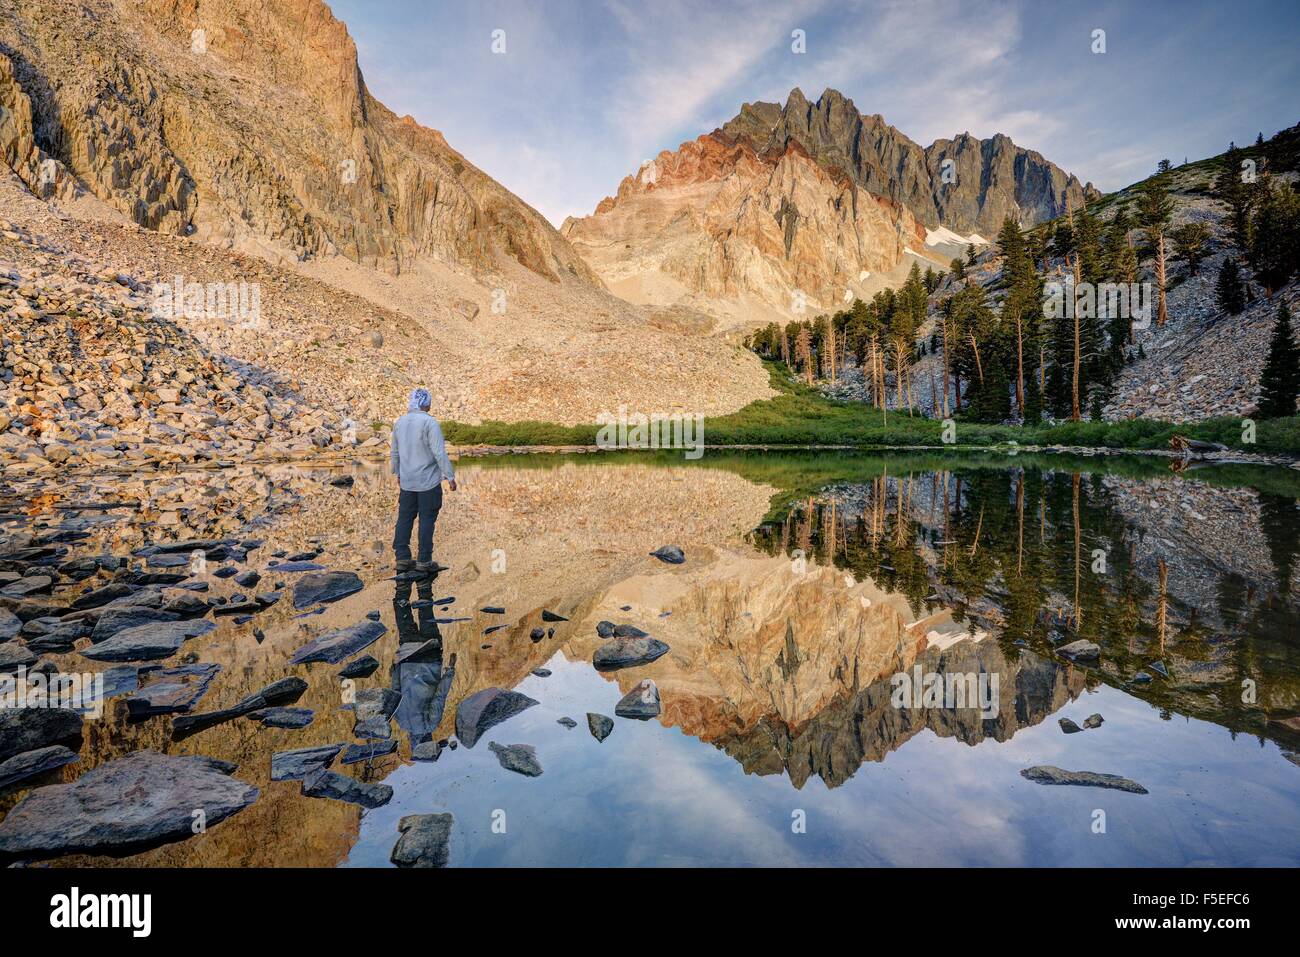 Man standing by Lake, Inyo National Forest, California, United States Stock Photo